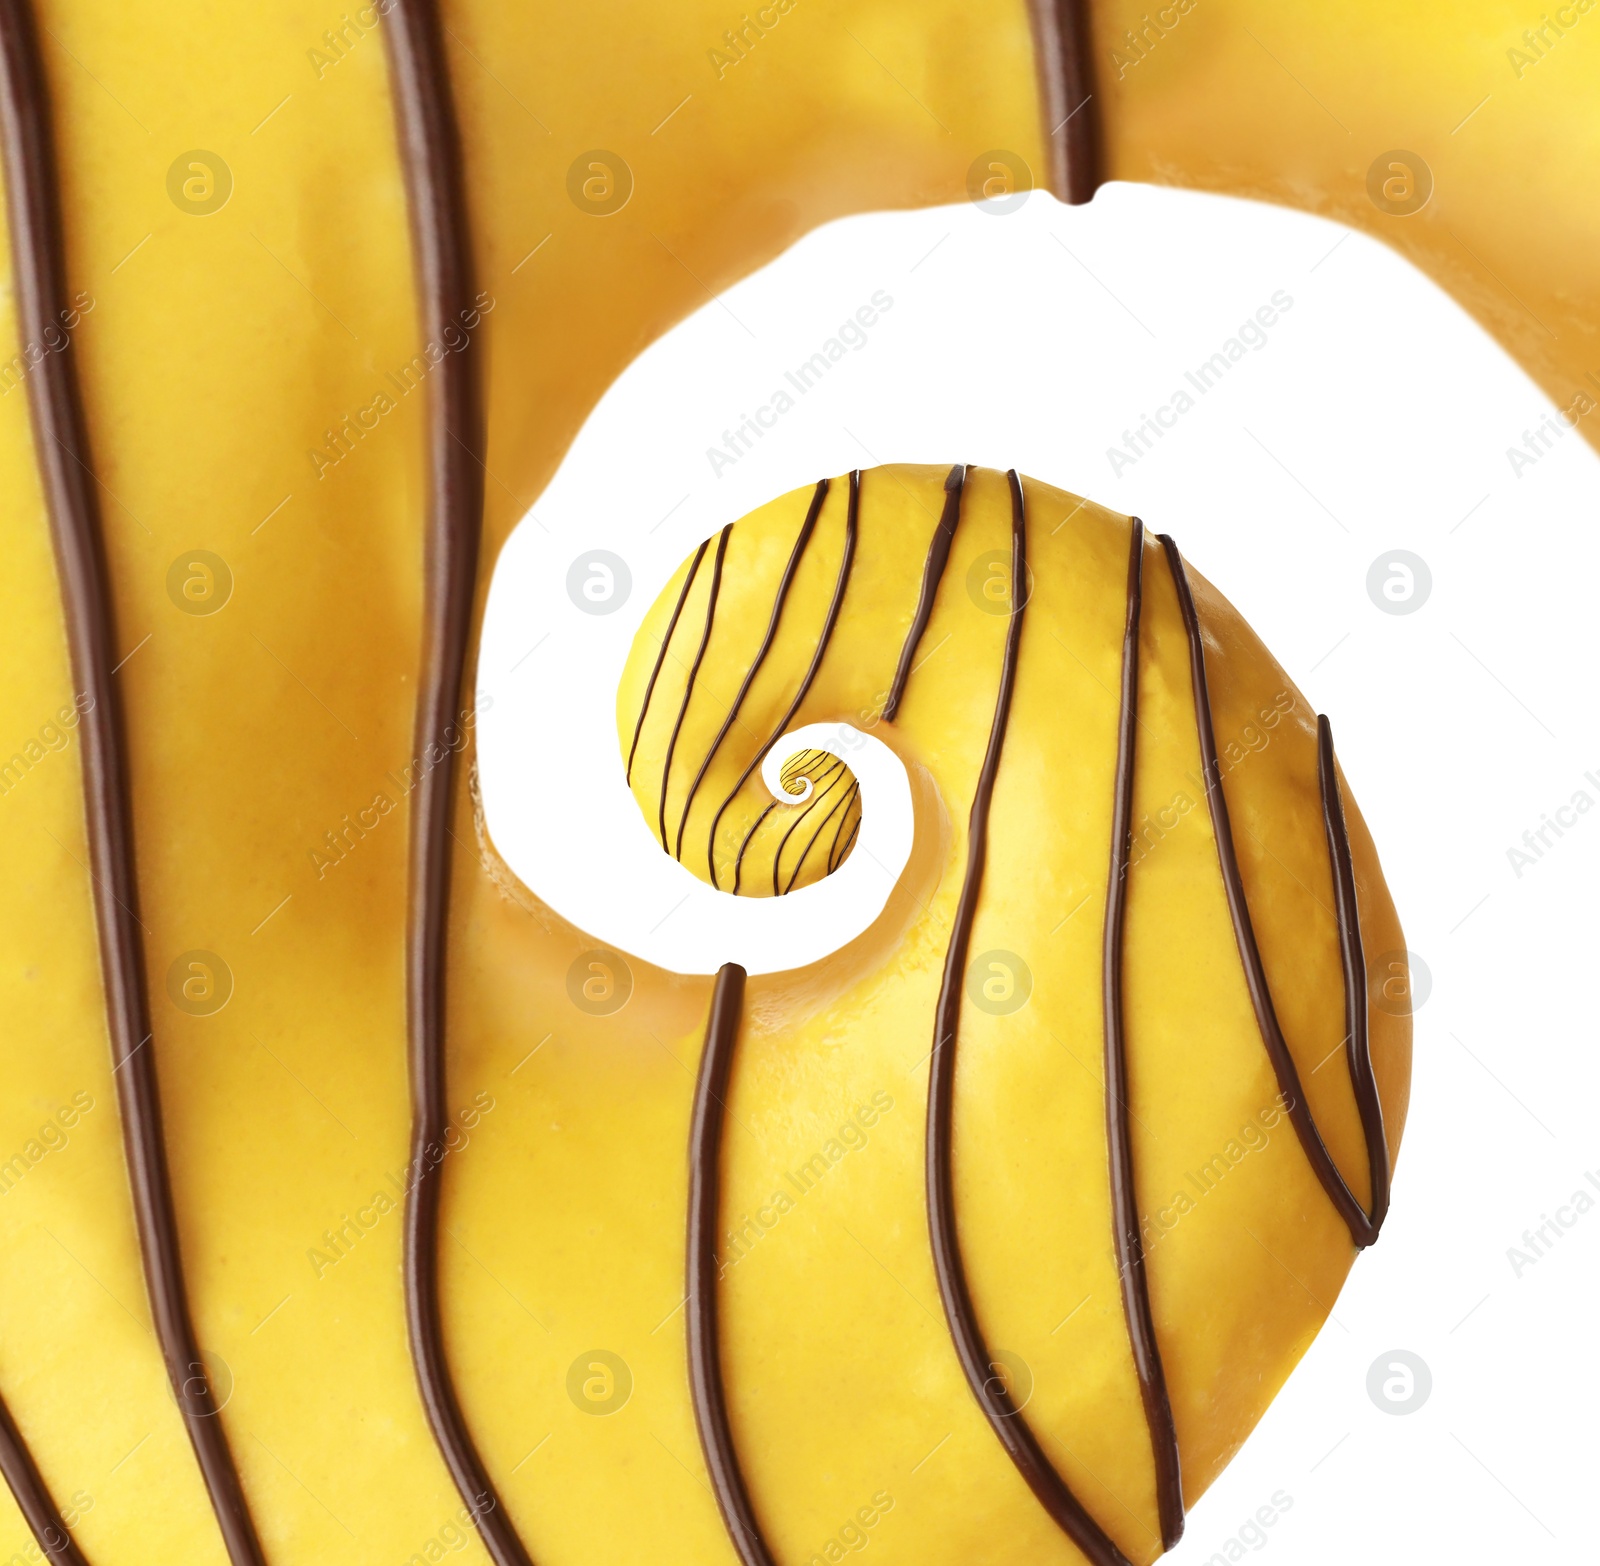 Image of Twisted donut with banana icing and chocolate topping on white background, spiral effect